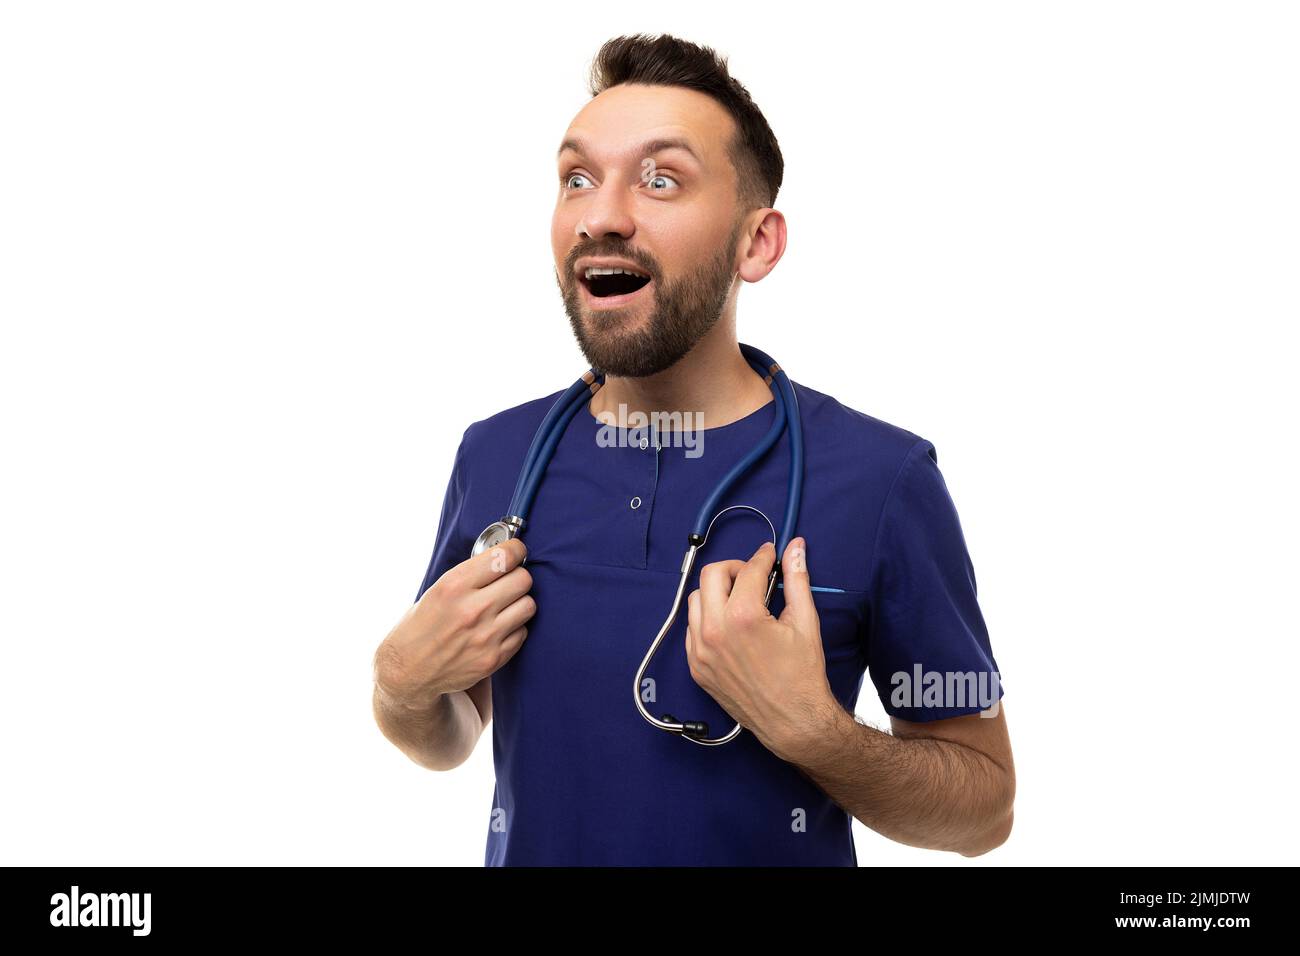 Dumbfounded doctor with a smile and an open mouth on the background of a white wall looks up to the left Stock Photo